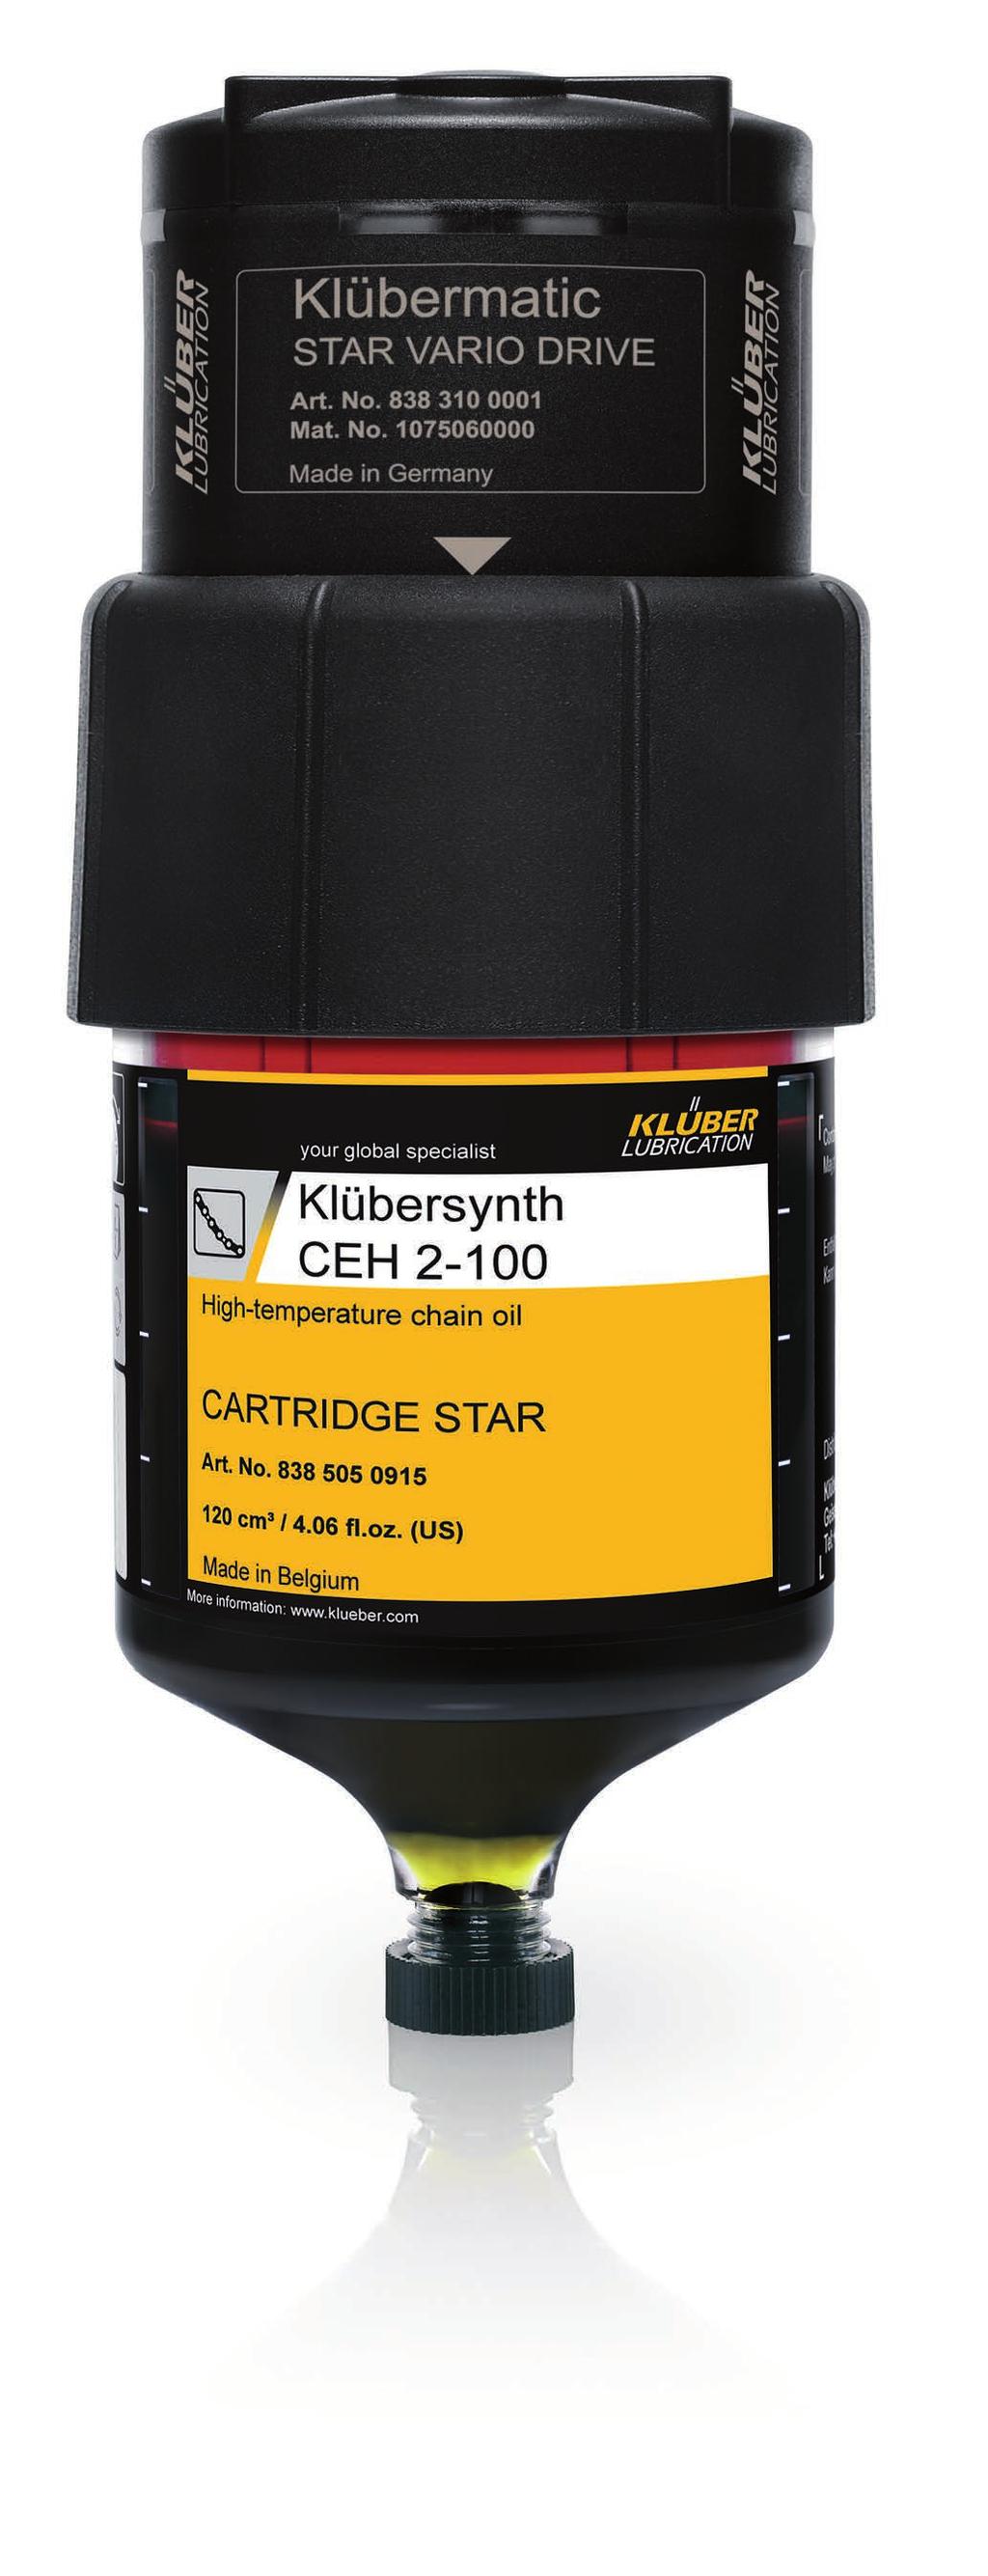 Klübermatic STAR VARIO Fully automatic precision lubrication Precise metering and adjustable lubricant amount Klübermatic STAR VARIO is a fully automatic, temperature and pressure independent system